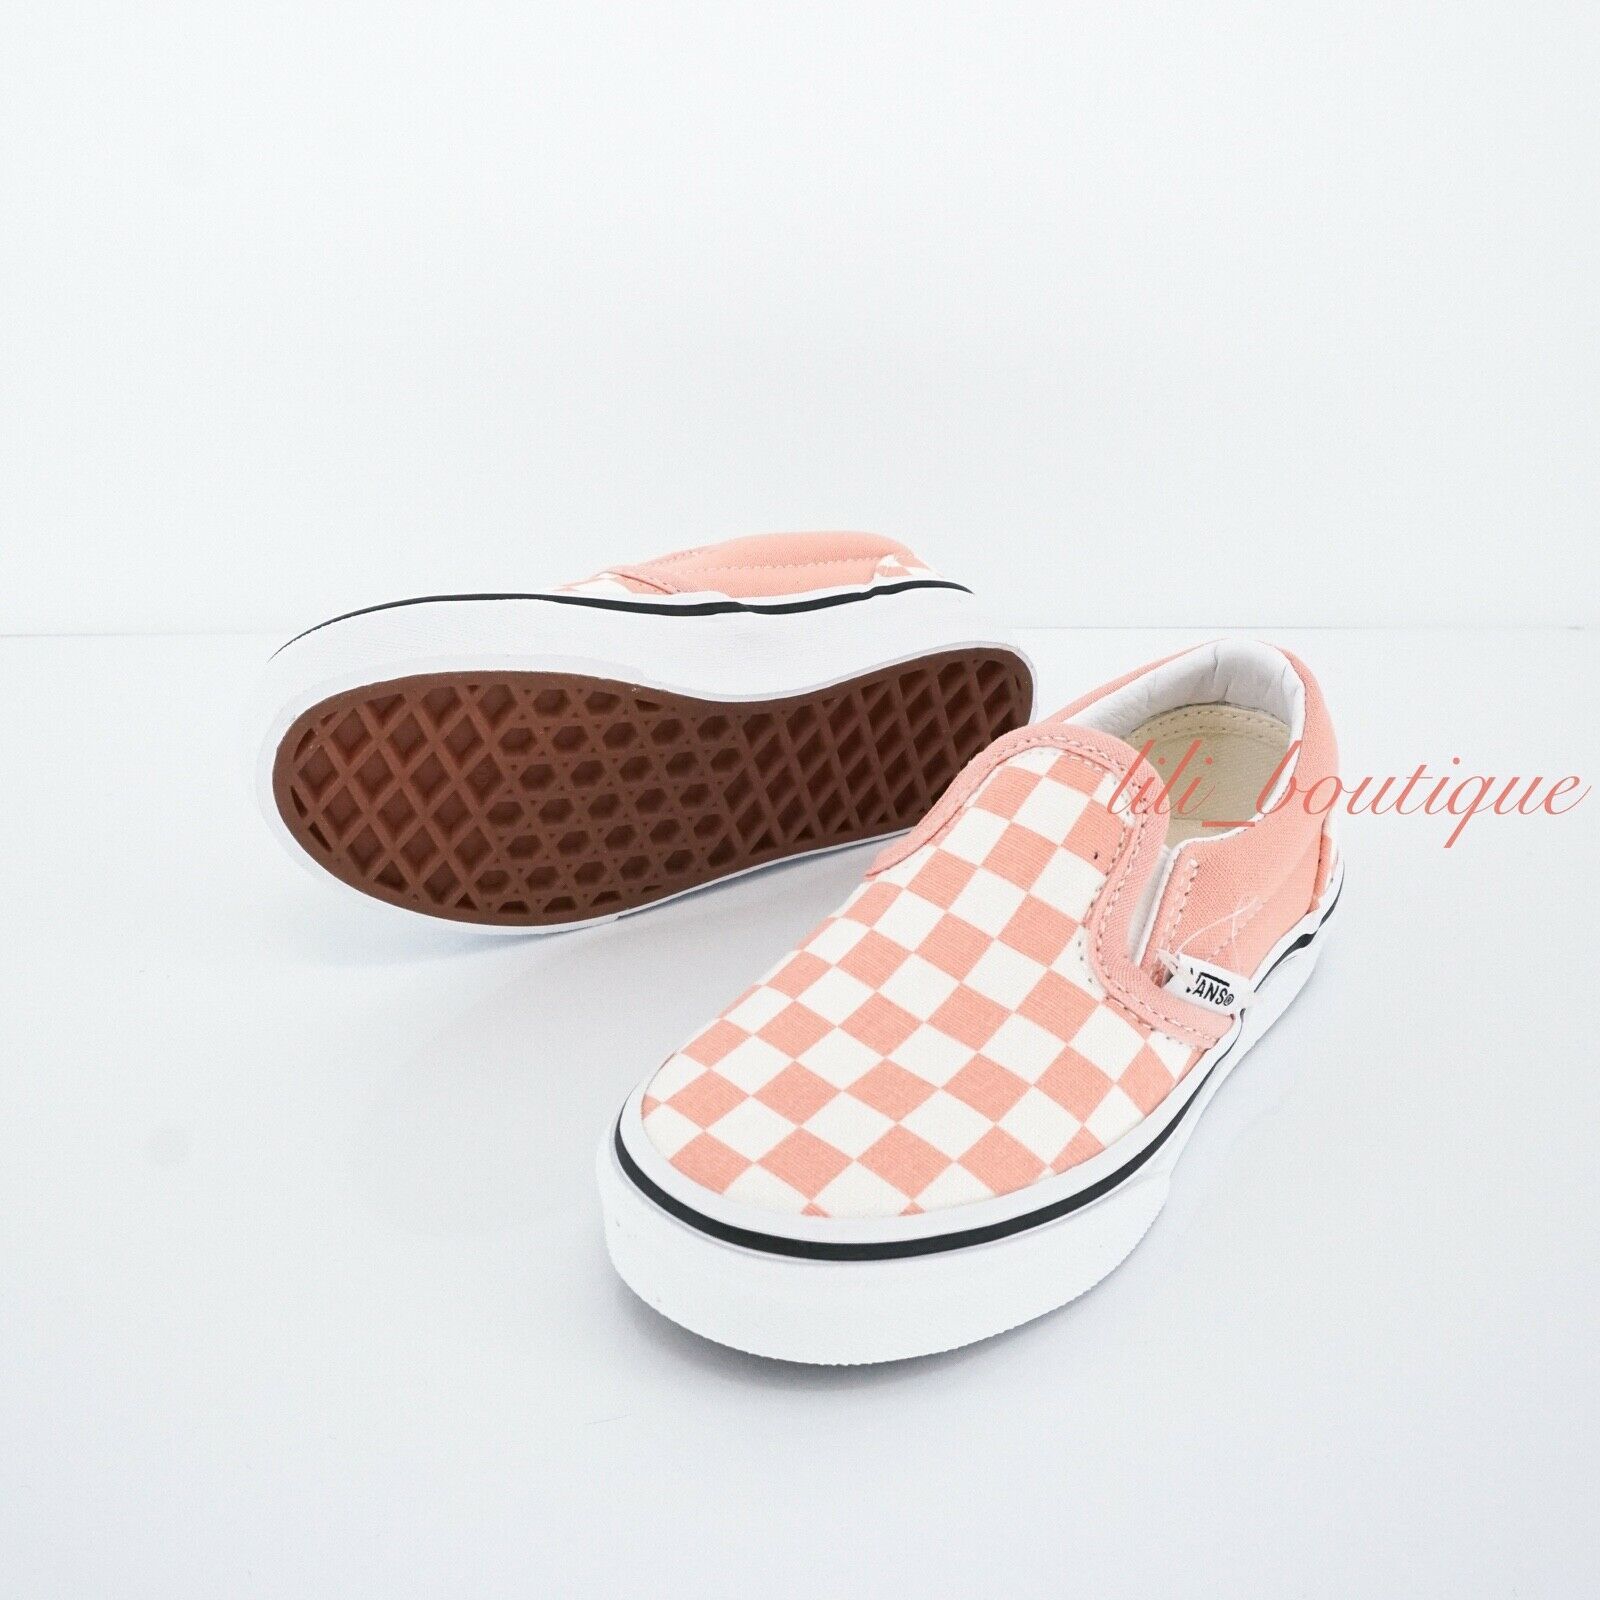 Primary image for No Box New Vans Kids Classic Slip-On Shoes Canvas Checkerboard Salmon White 1.0K